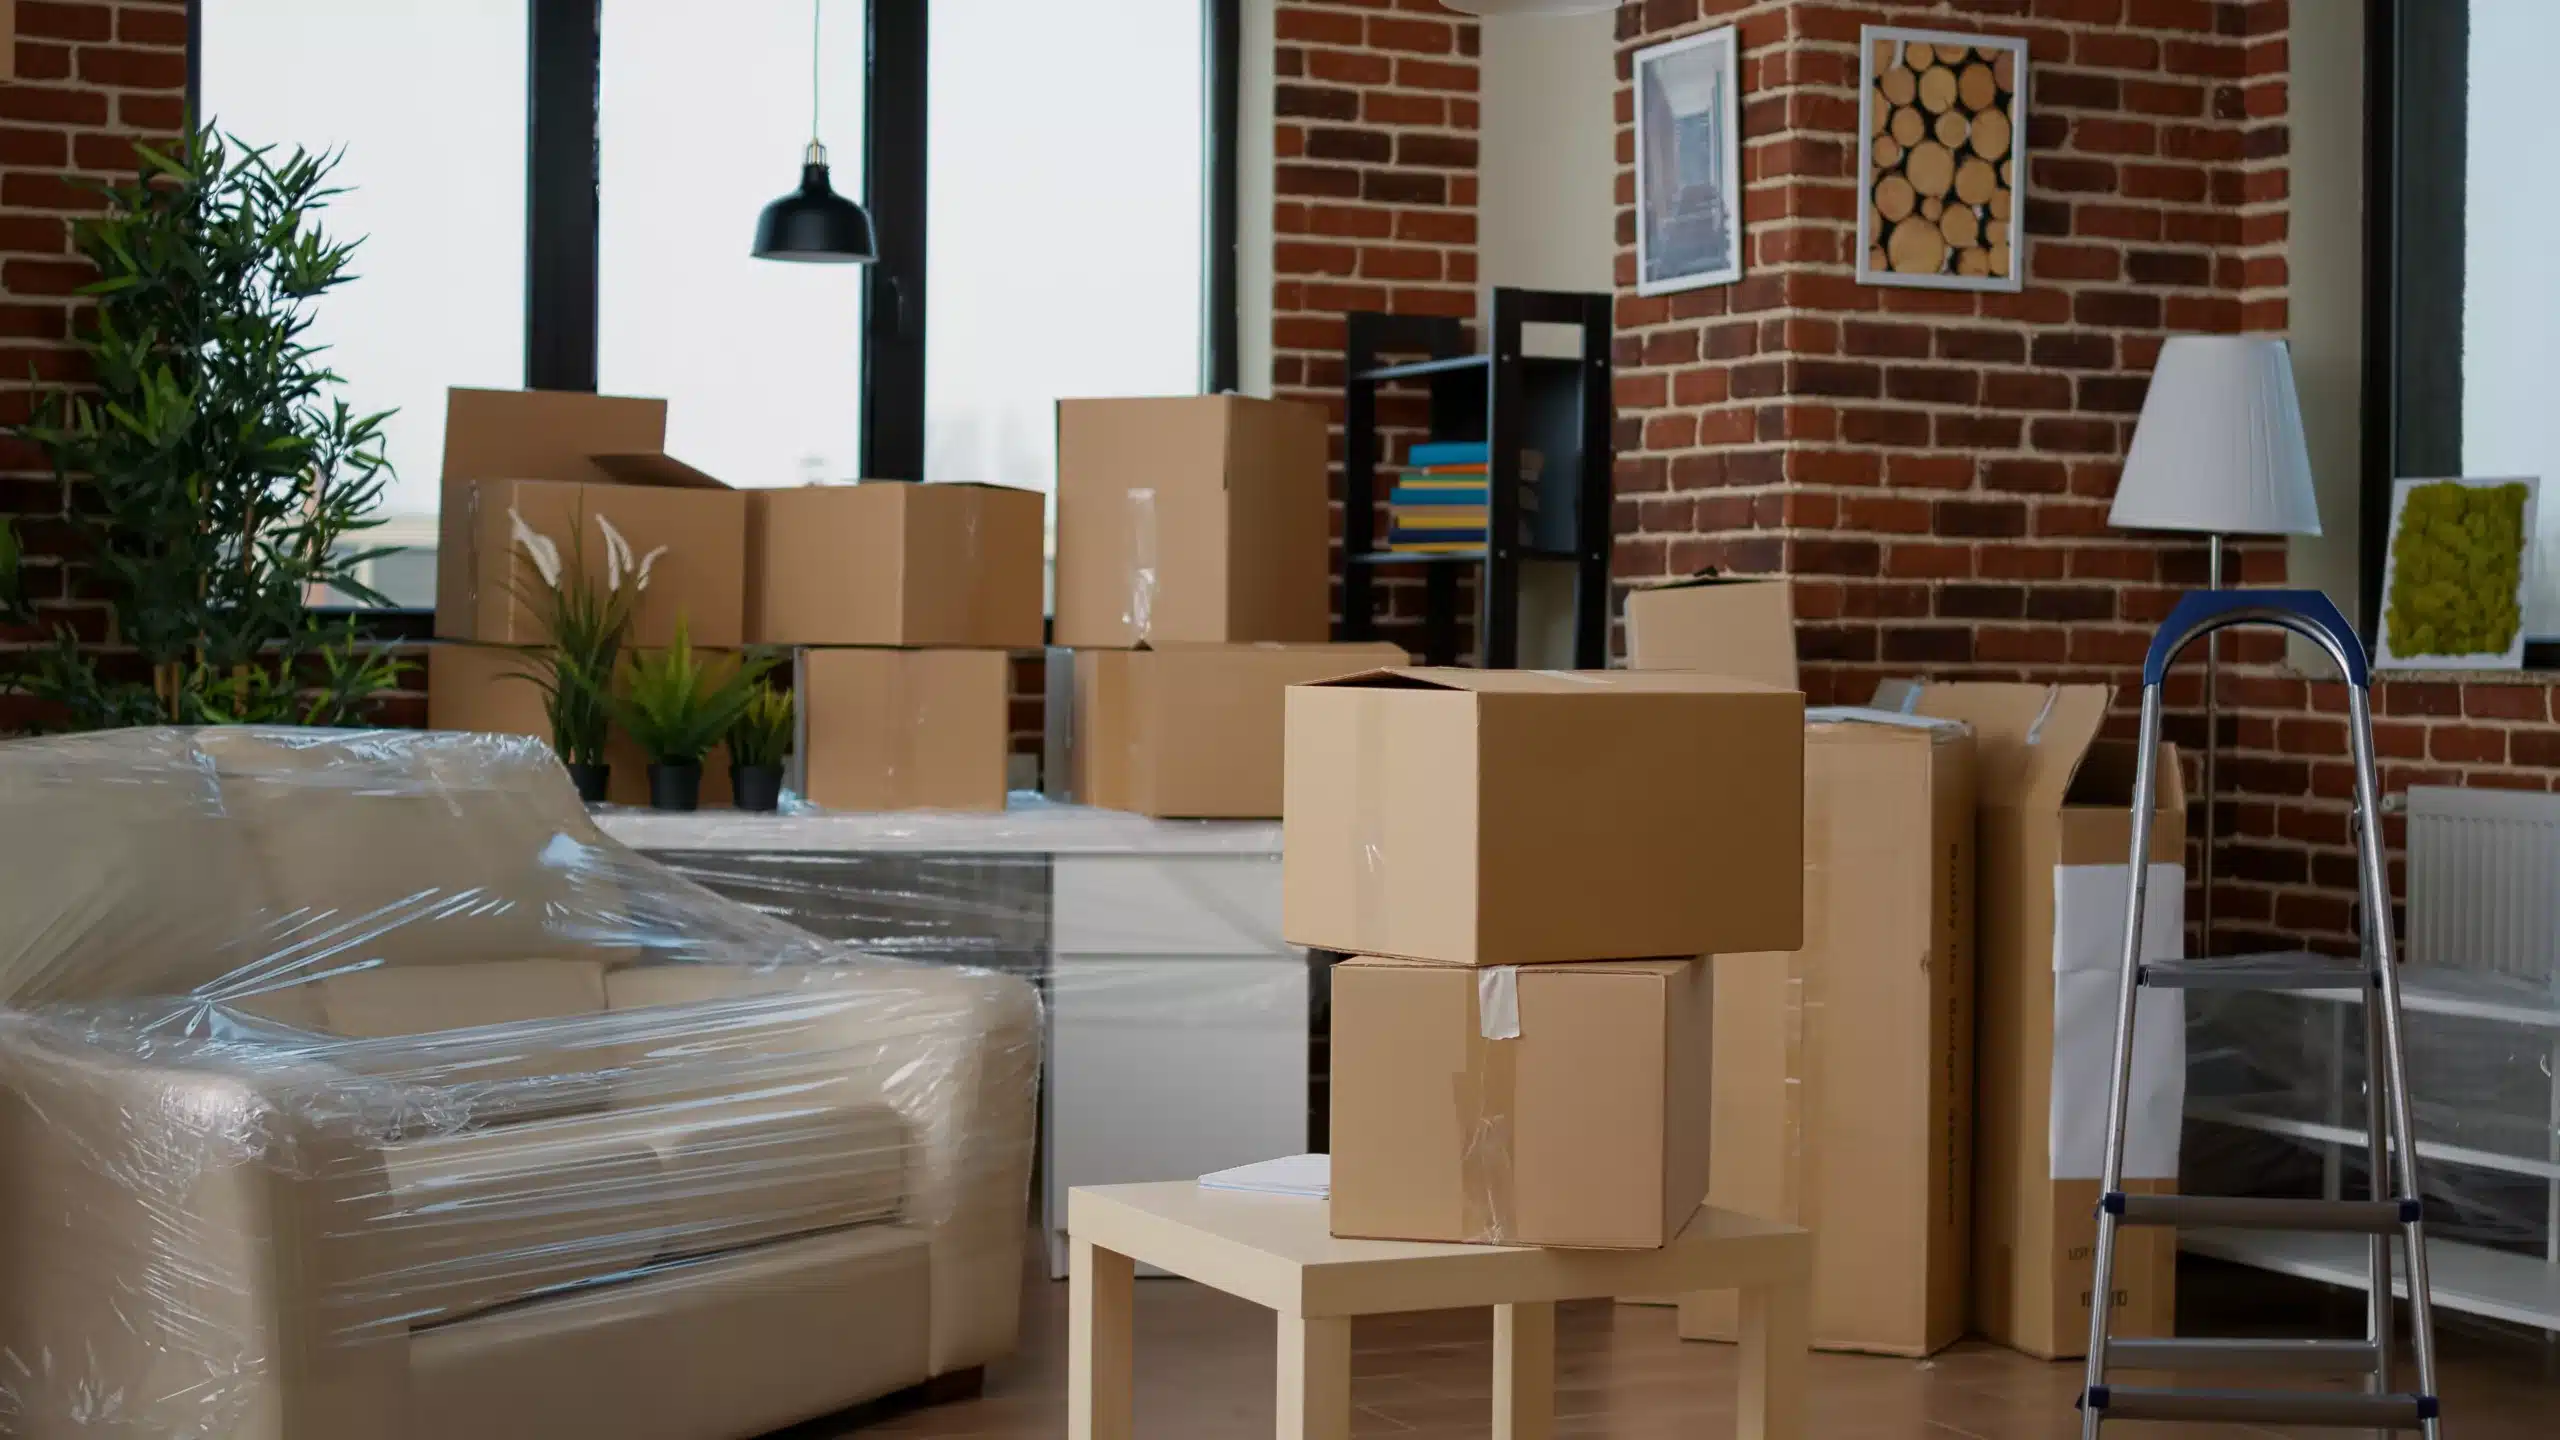 nobody empty living room with cardboard packaging new home furniture things stack carton boxes no people household property with package cargo move real estate scaled